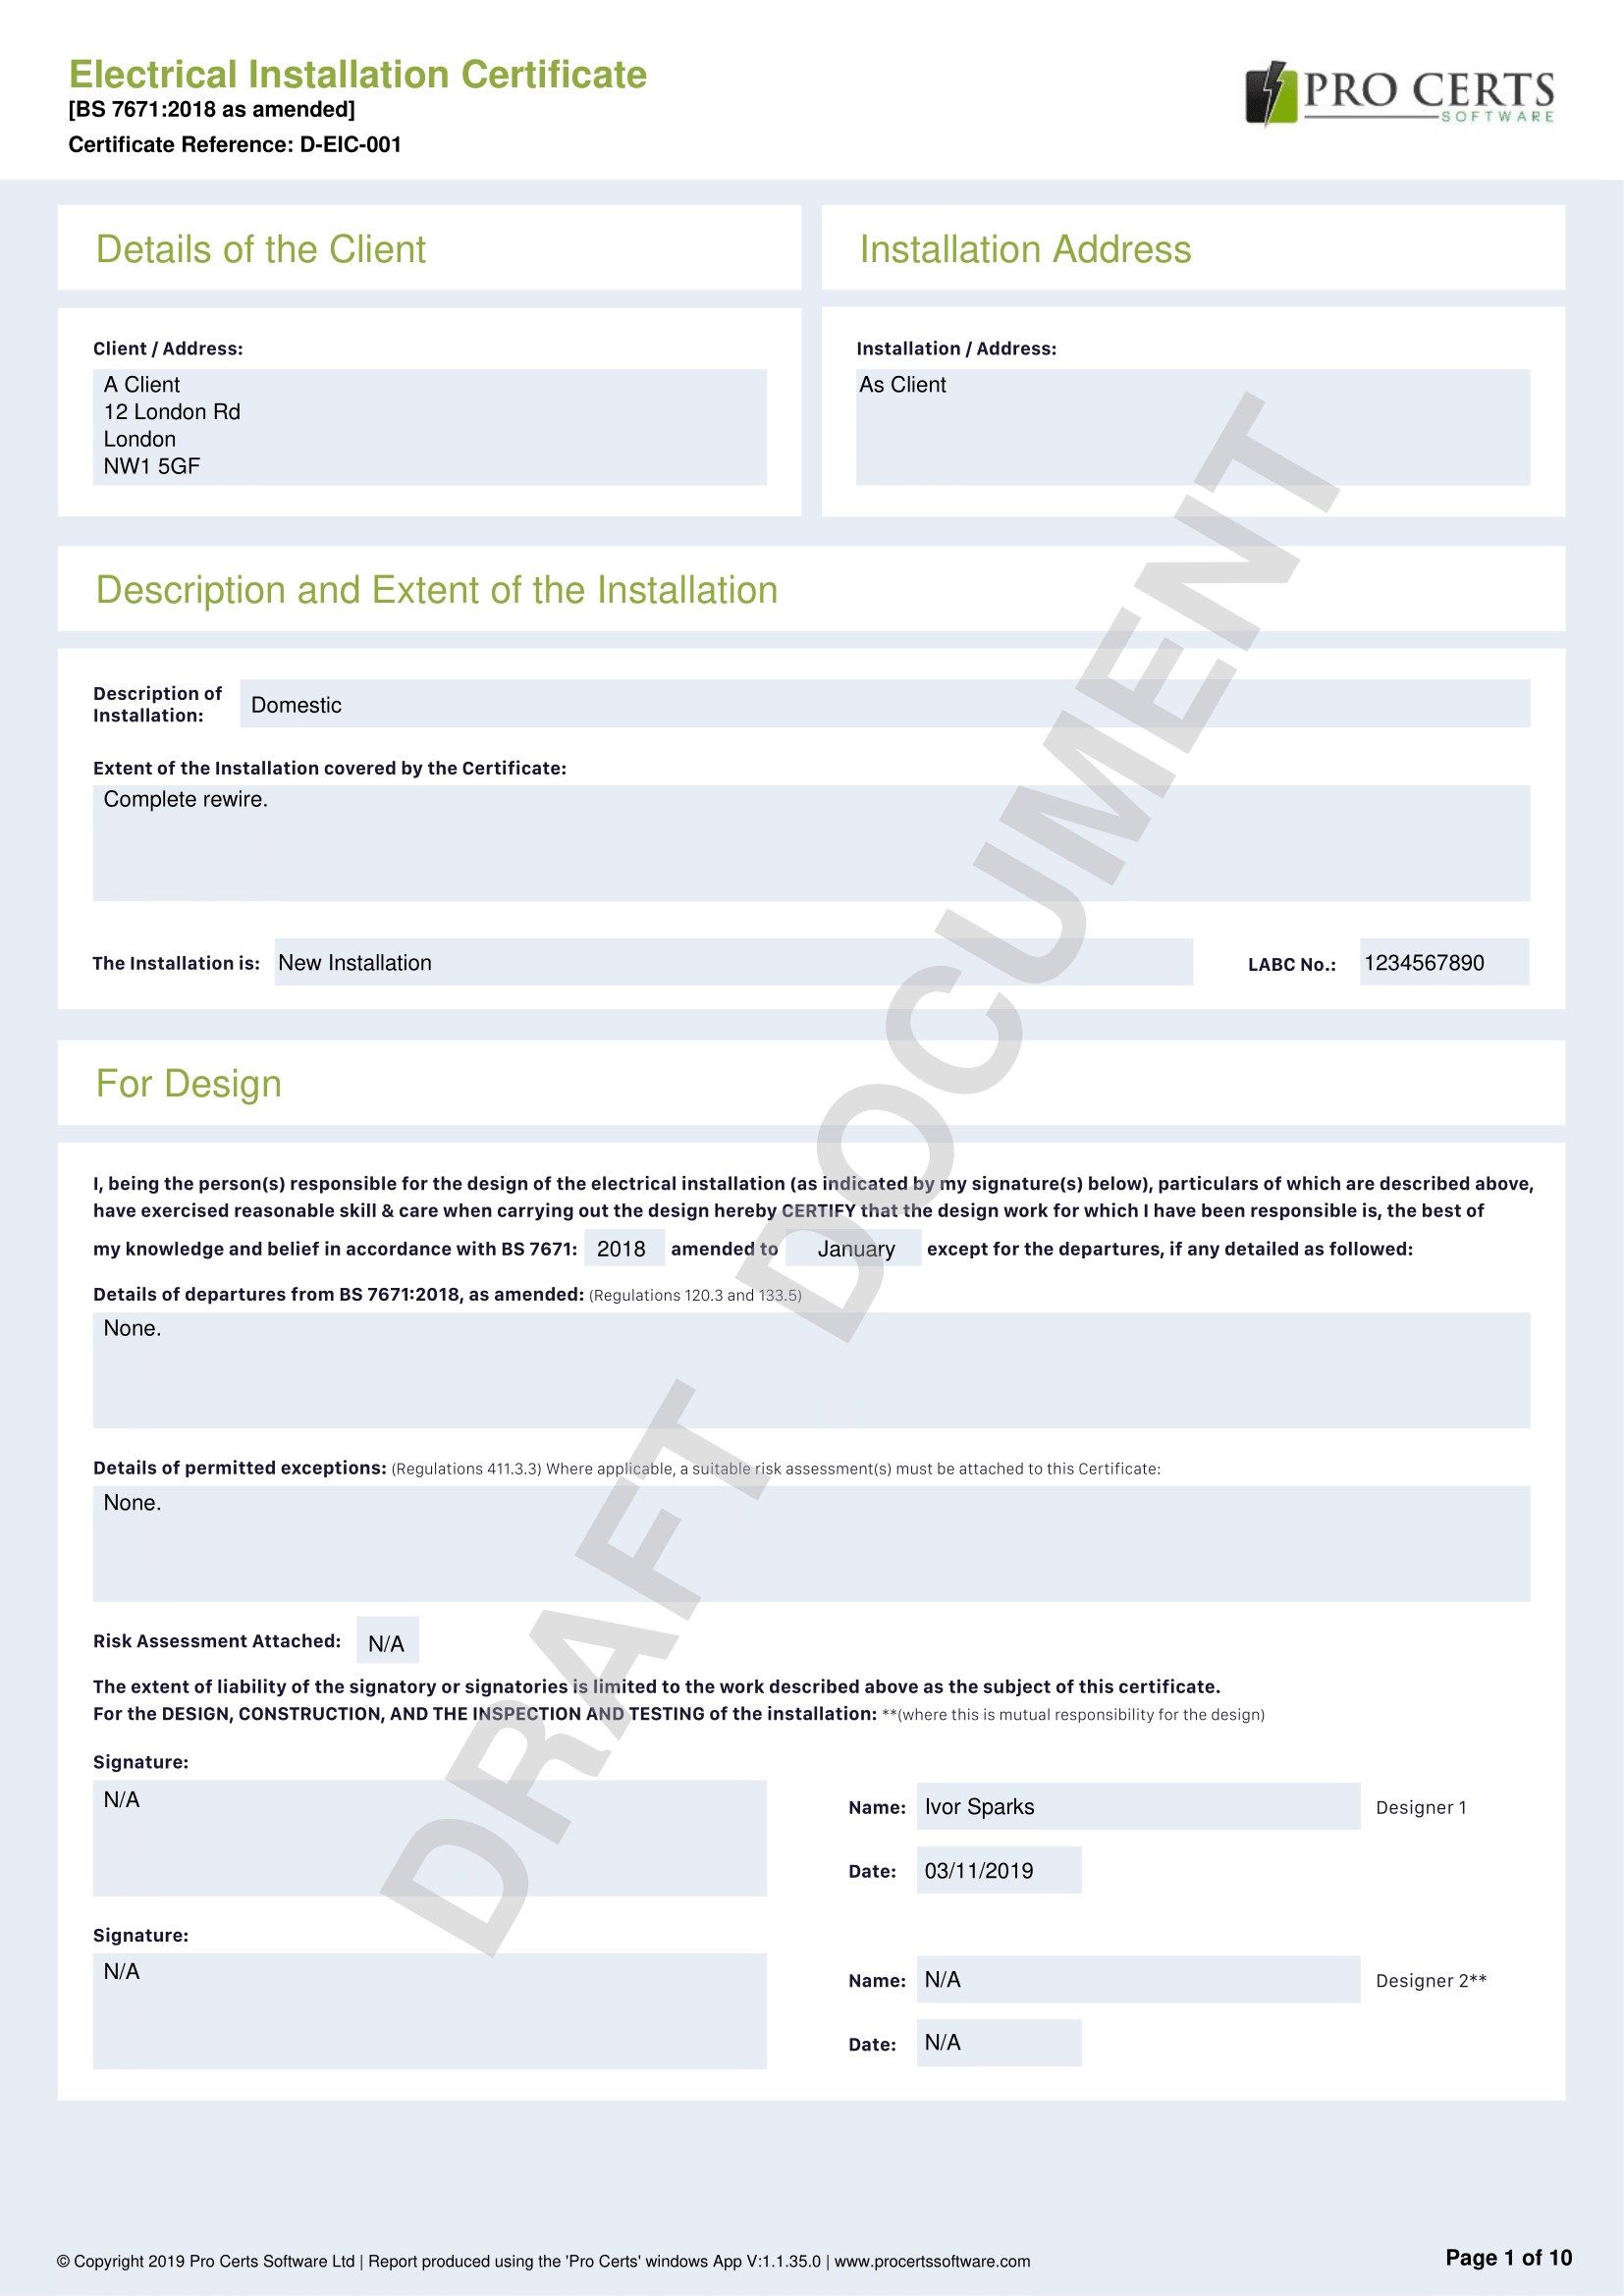 Example PDF electrical installation certificate using the green colour scheme, header text colours and certificate default colours can be changed in settings. The Pro Certs logo is where your own logo will be on every page.